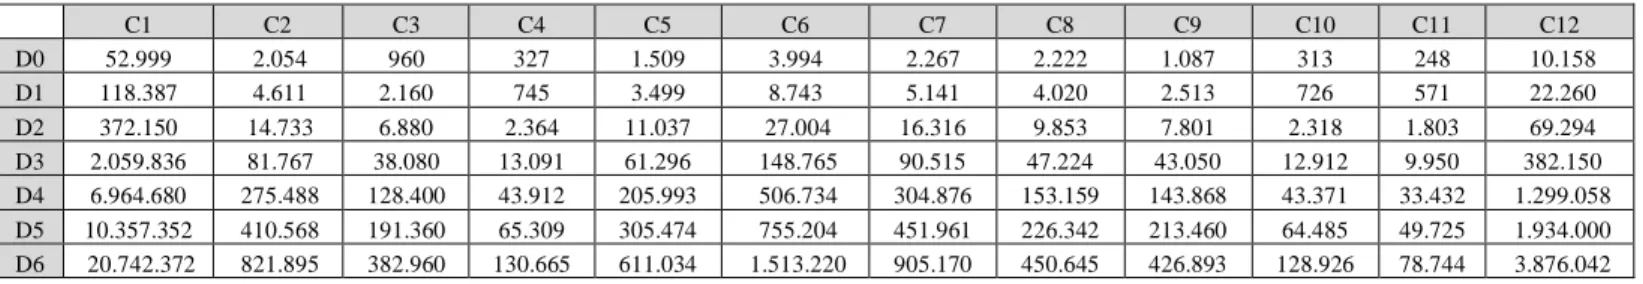 Table 7 Number of complex change instances per category detected in EvoGen generated datasets  